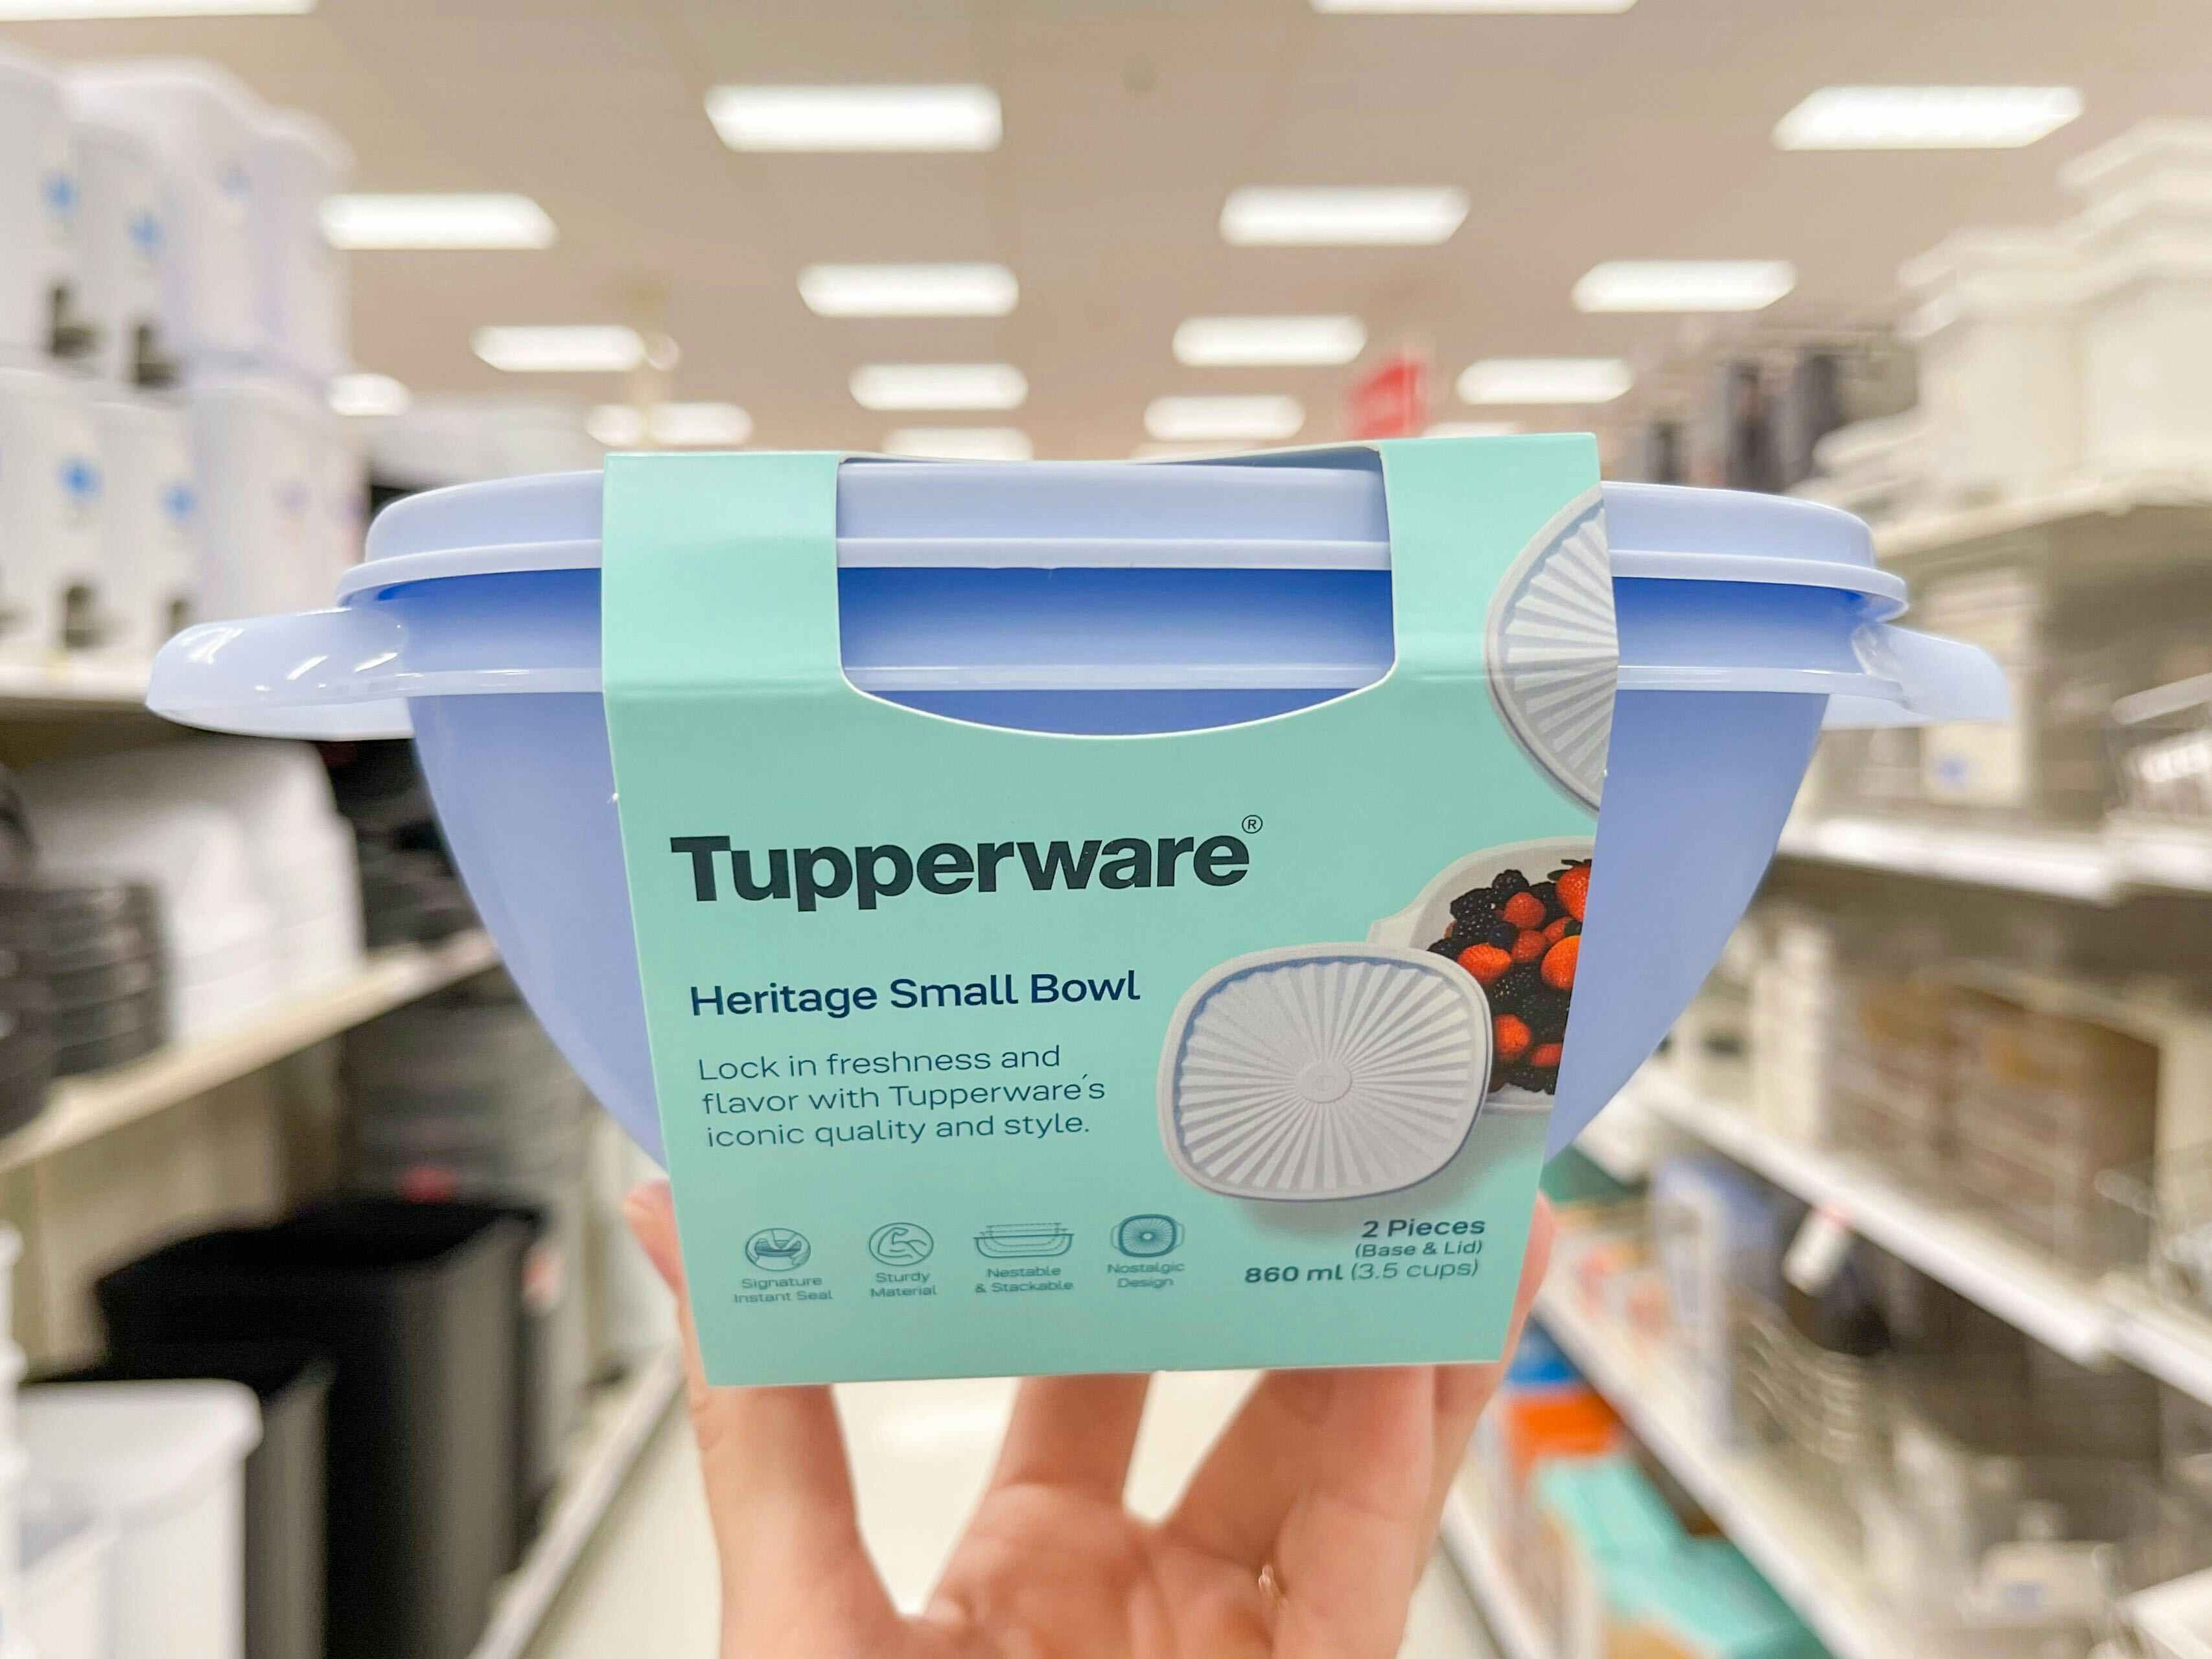 a hand holding up a tupperware container in a Target store aisle